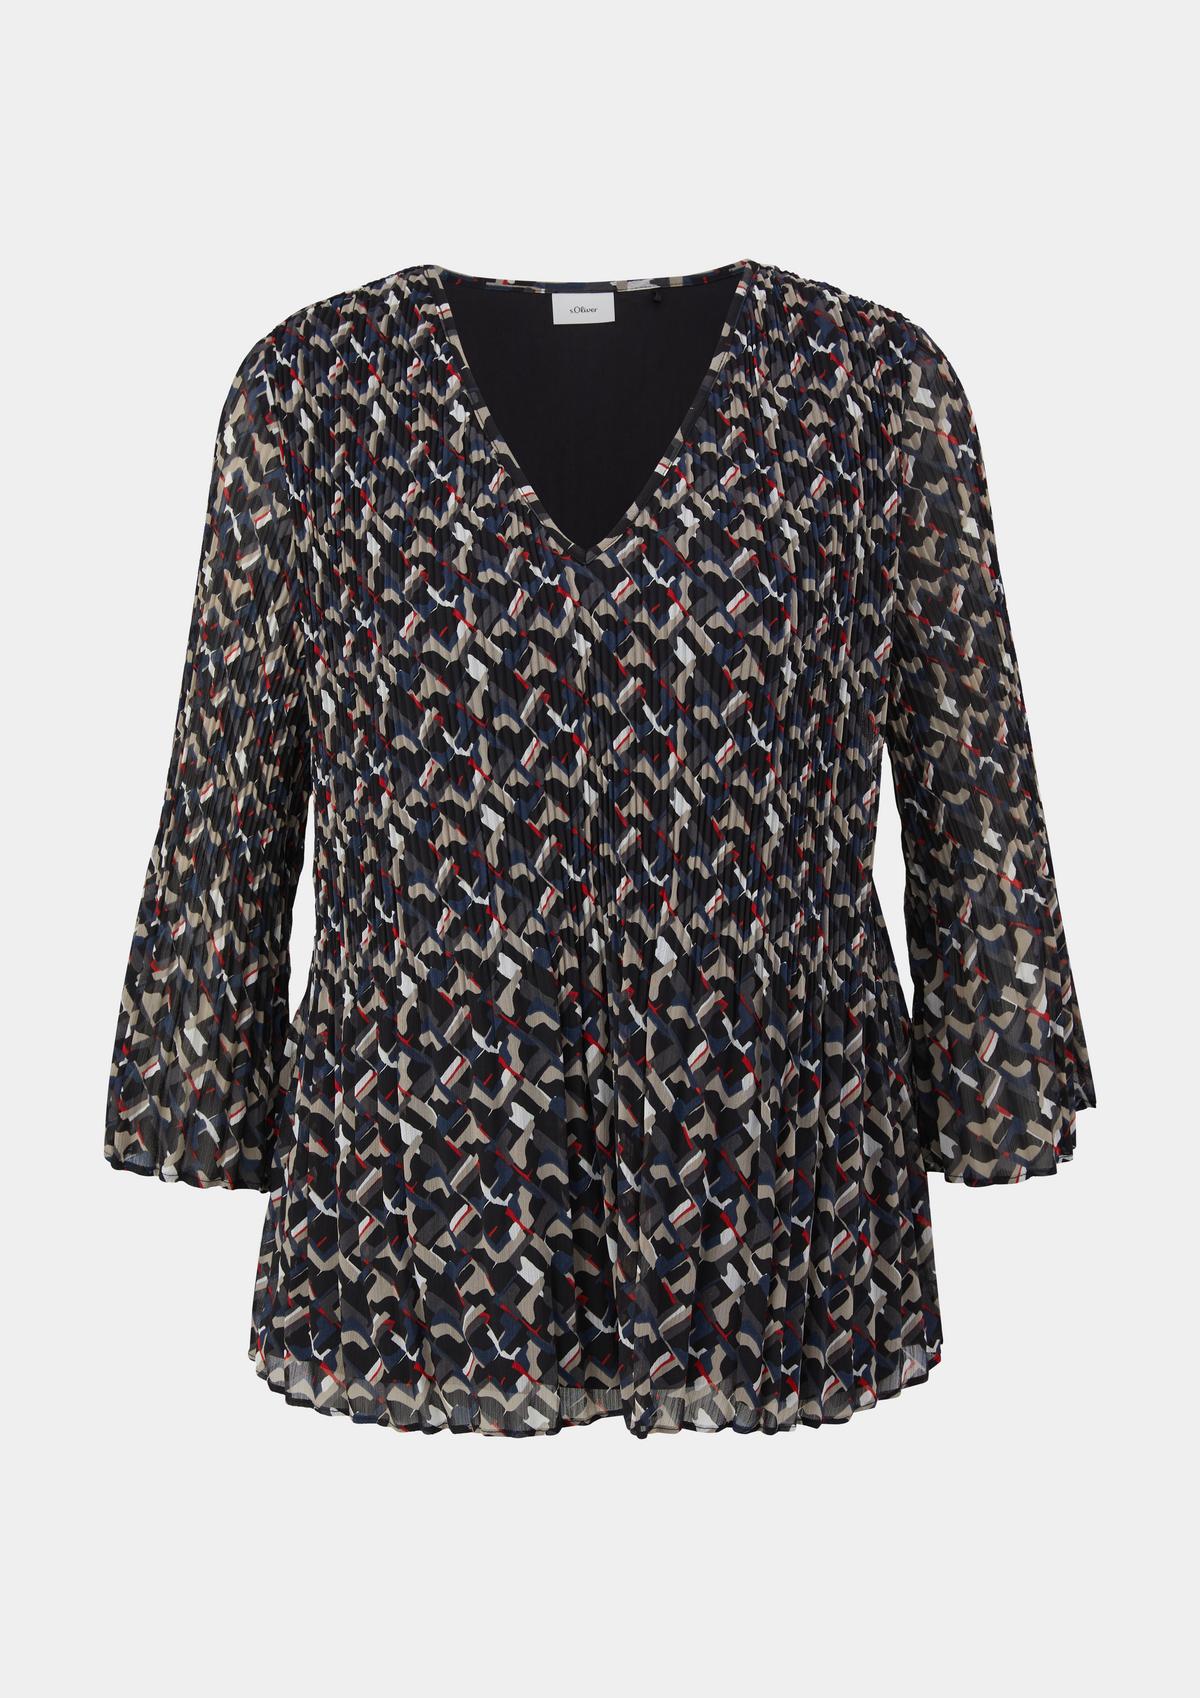 s.Oliver Blouse top with a pleated texture